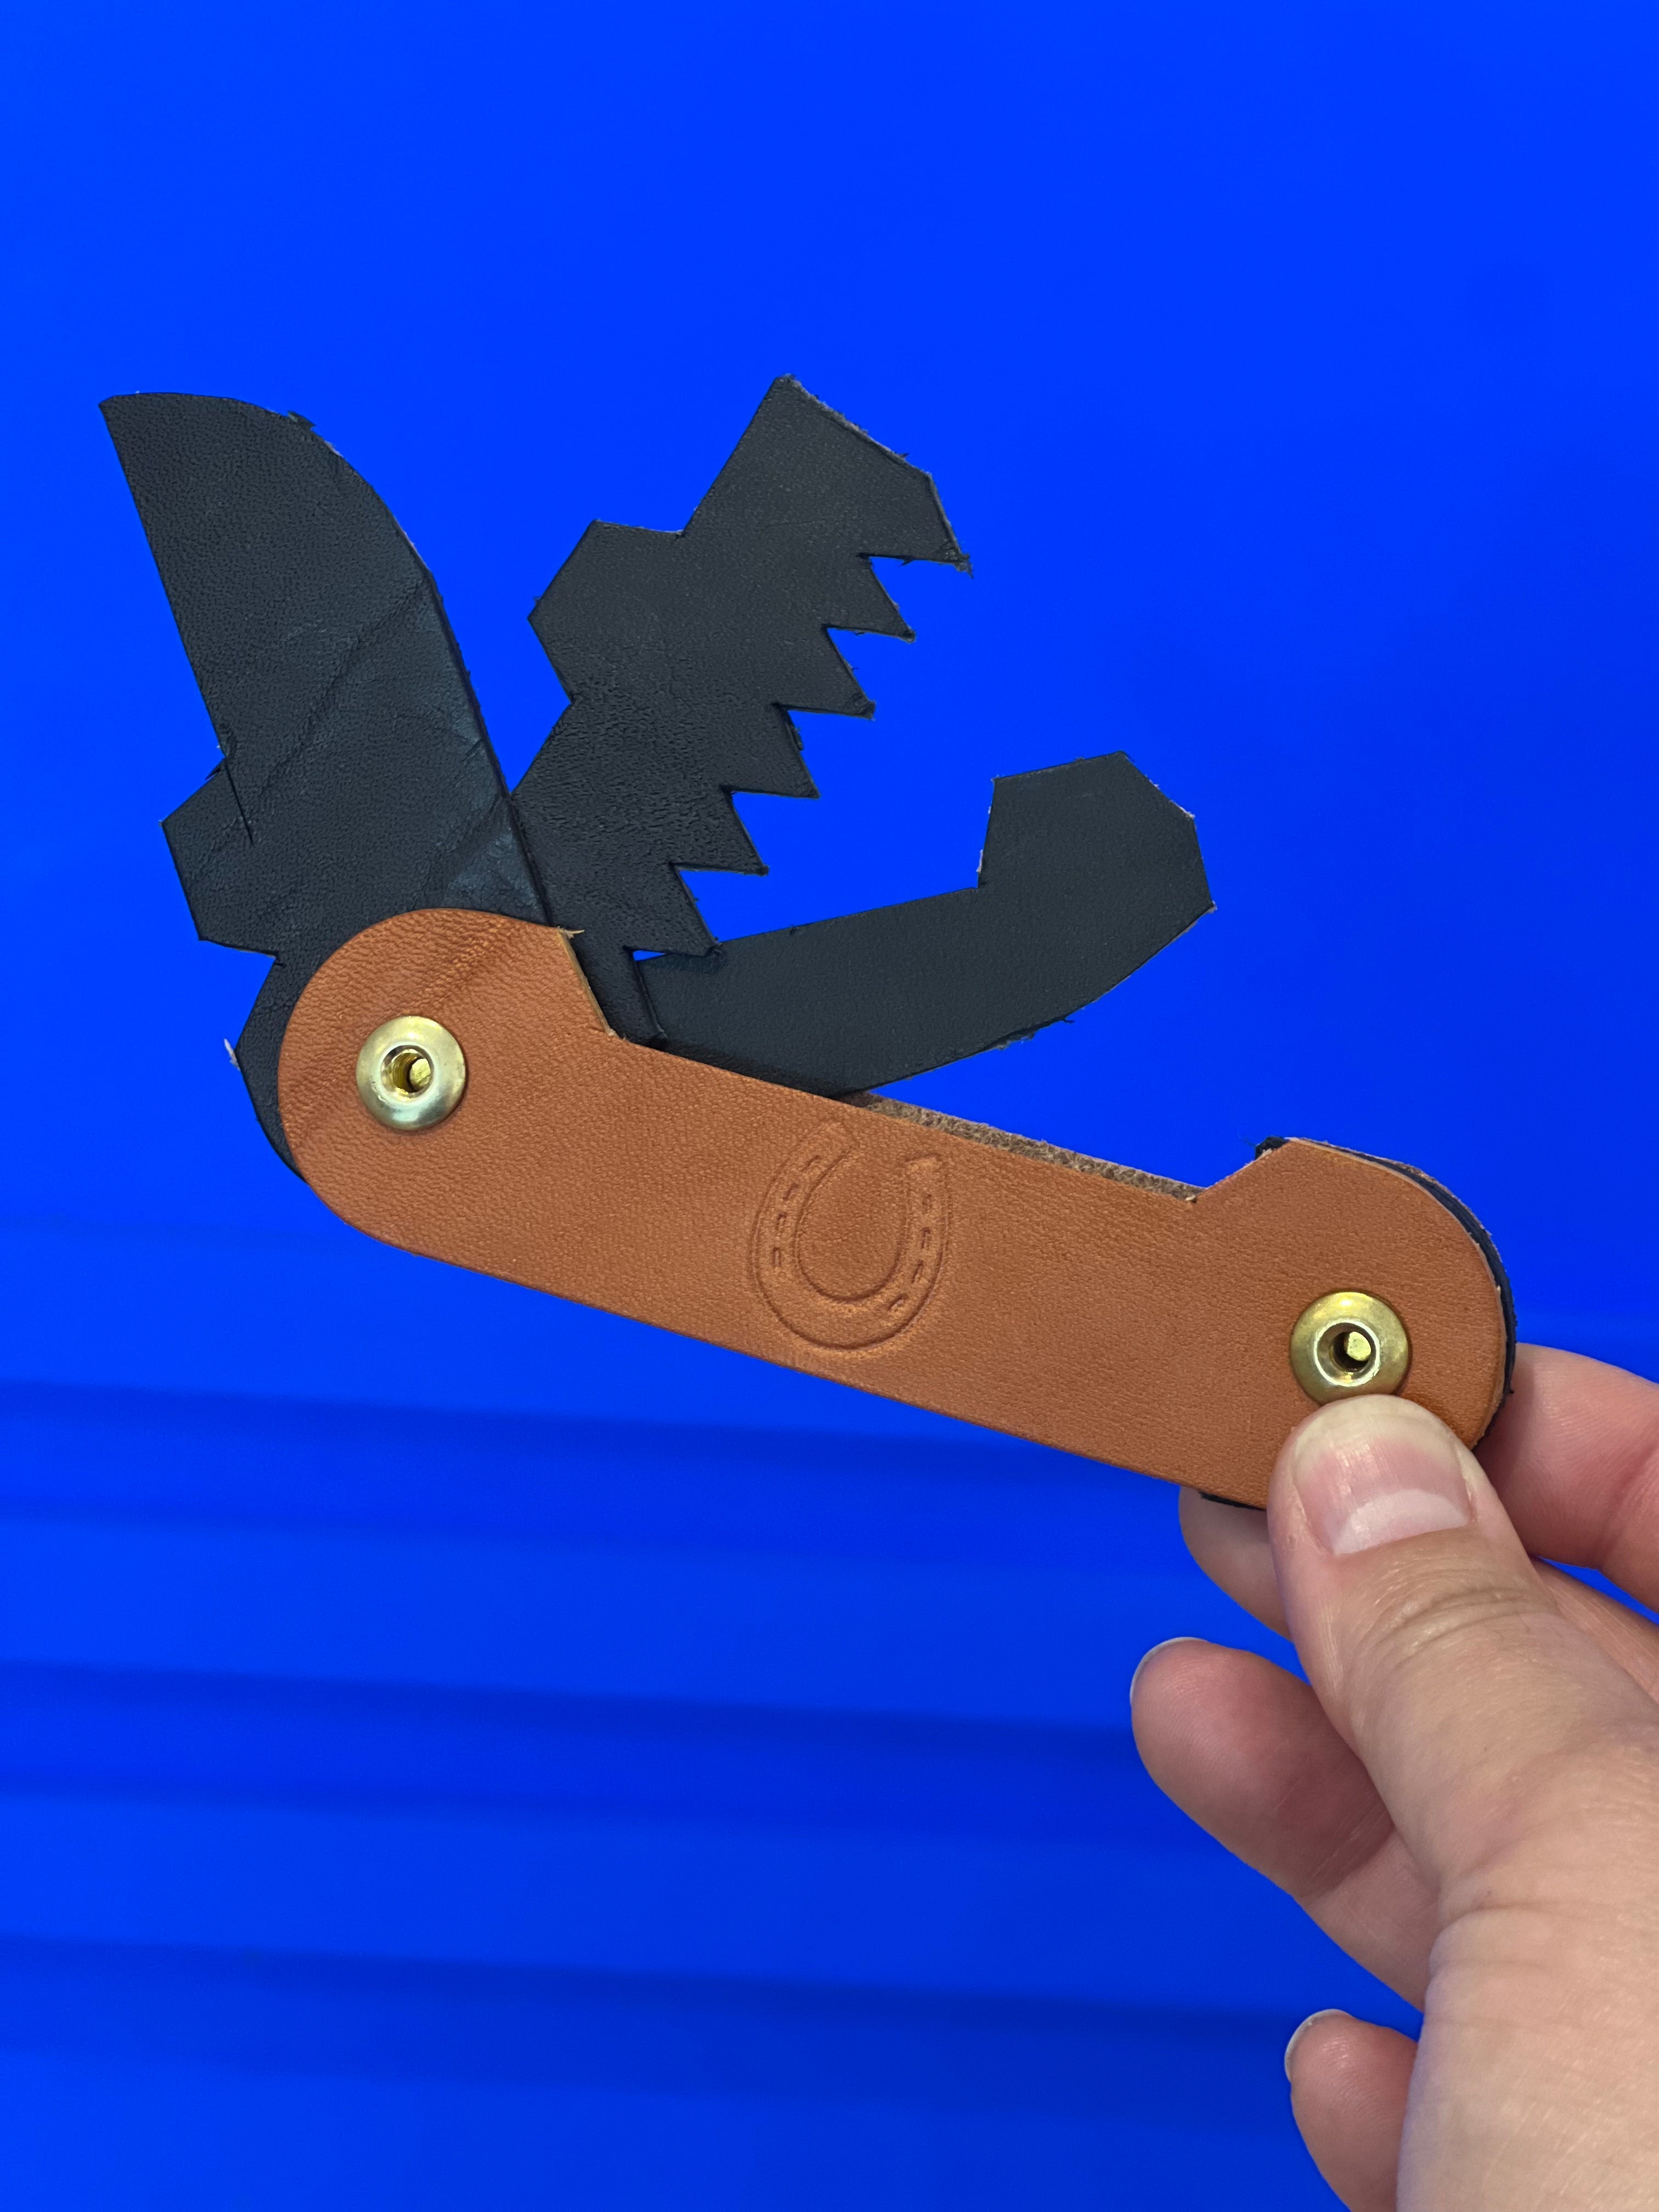 Introducing Our First Kids Toy: Kid's Leather Play Pocket Knife!